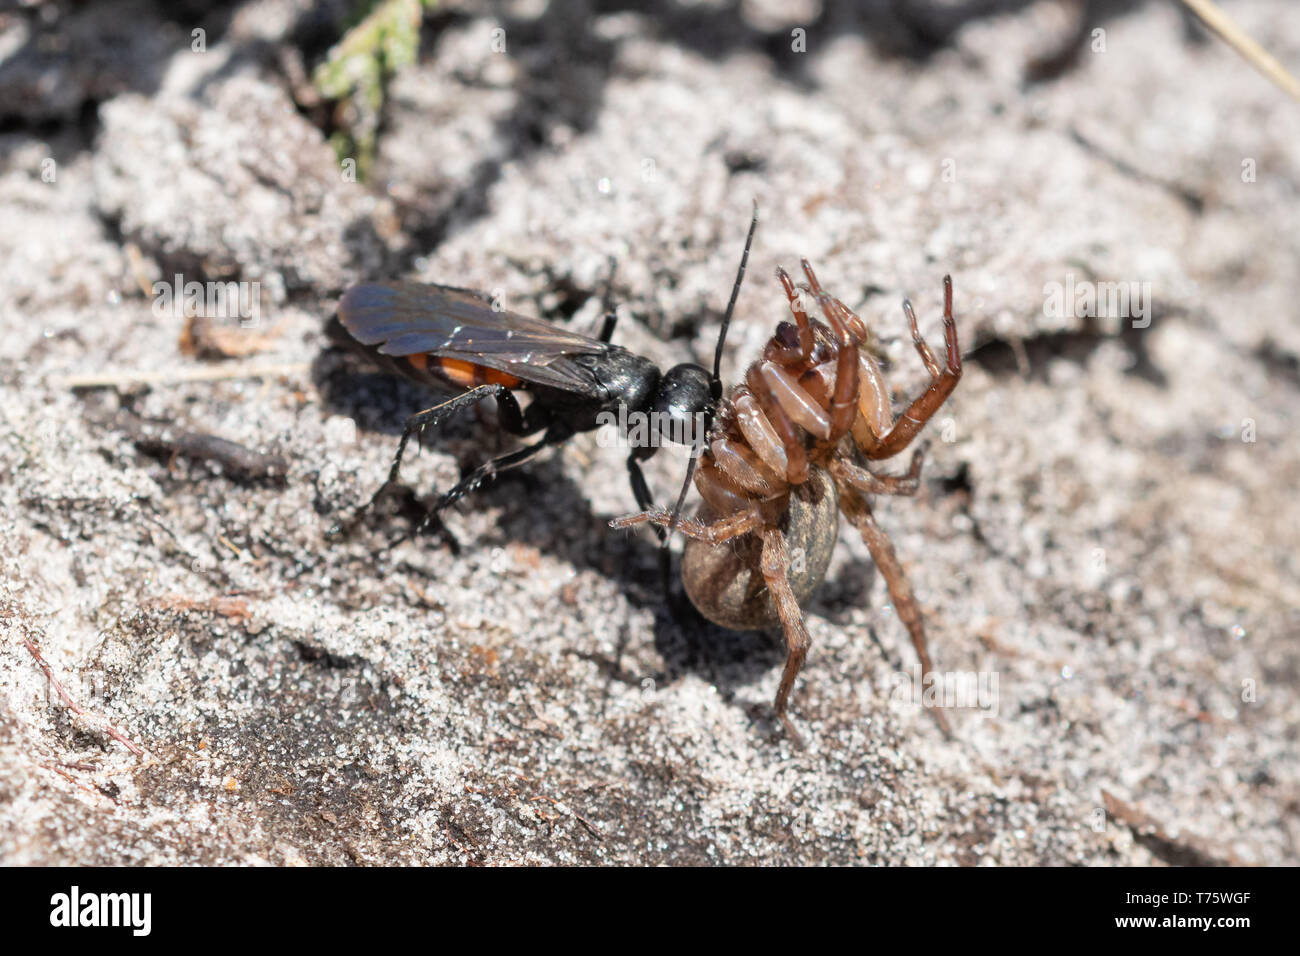 Black banded spider wasp (Anoplius viaticus) provisioning its nest burrow in sand with a paralysed spider, Surrey heathland, UK. Insect behaviour. Stock Photo